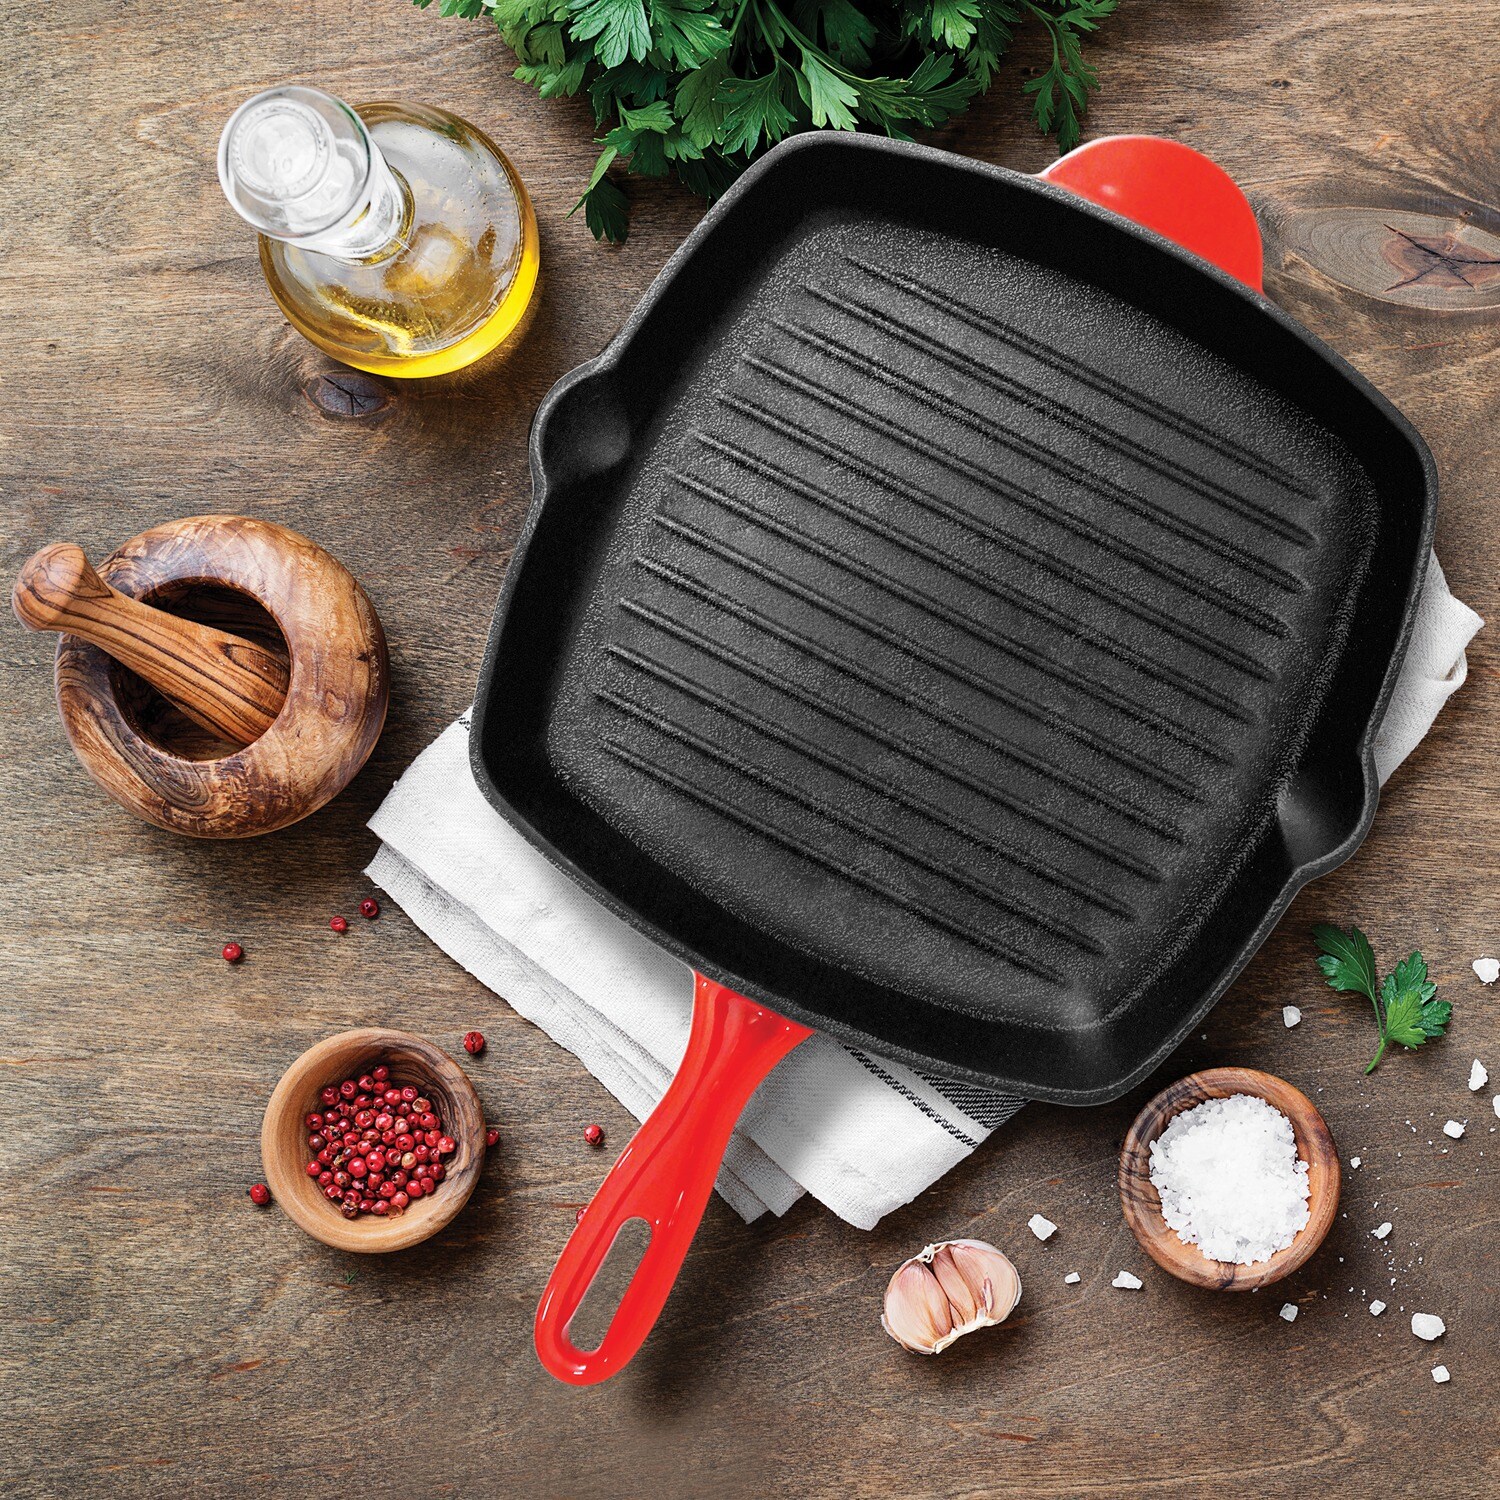 Starfrit THE ROCK 2.795-in Cast Iron Skillet in the Cooking Pans